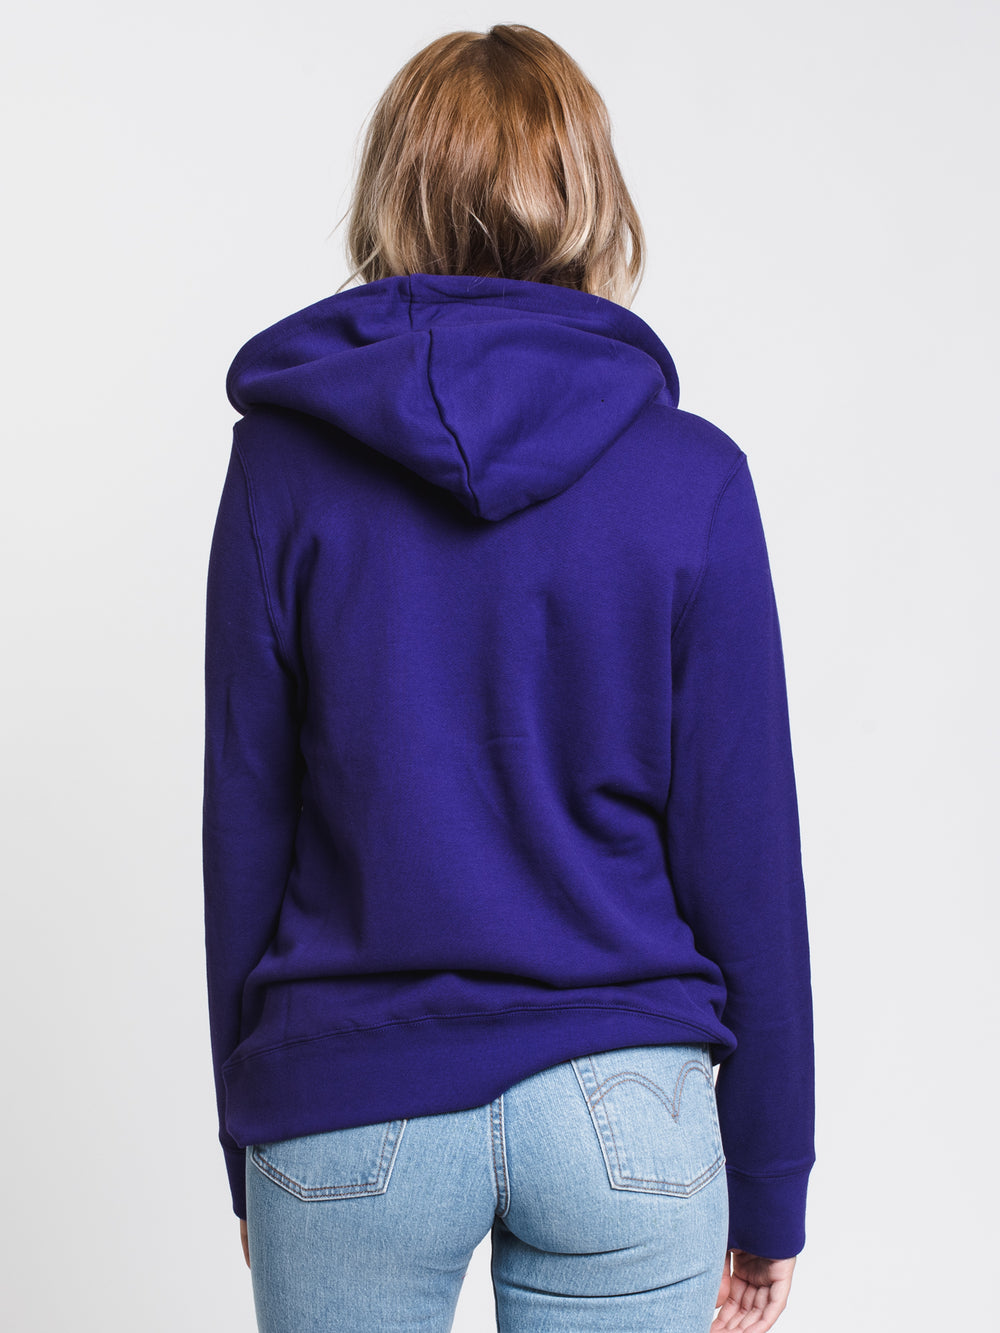 WOMENS TREFOIL PULLOVER HDY - PURPLE - CLEARANCE